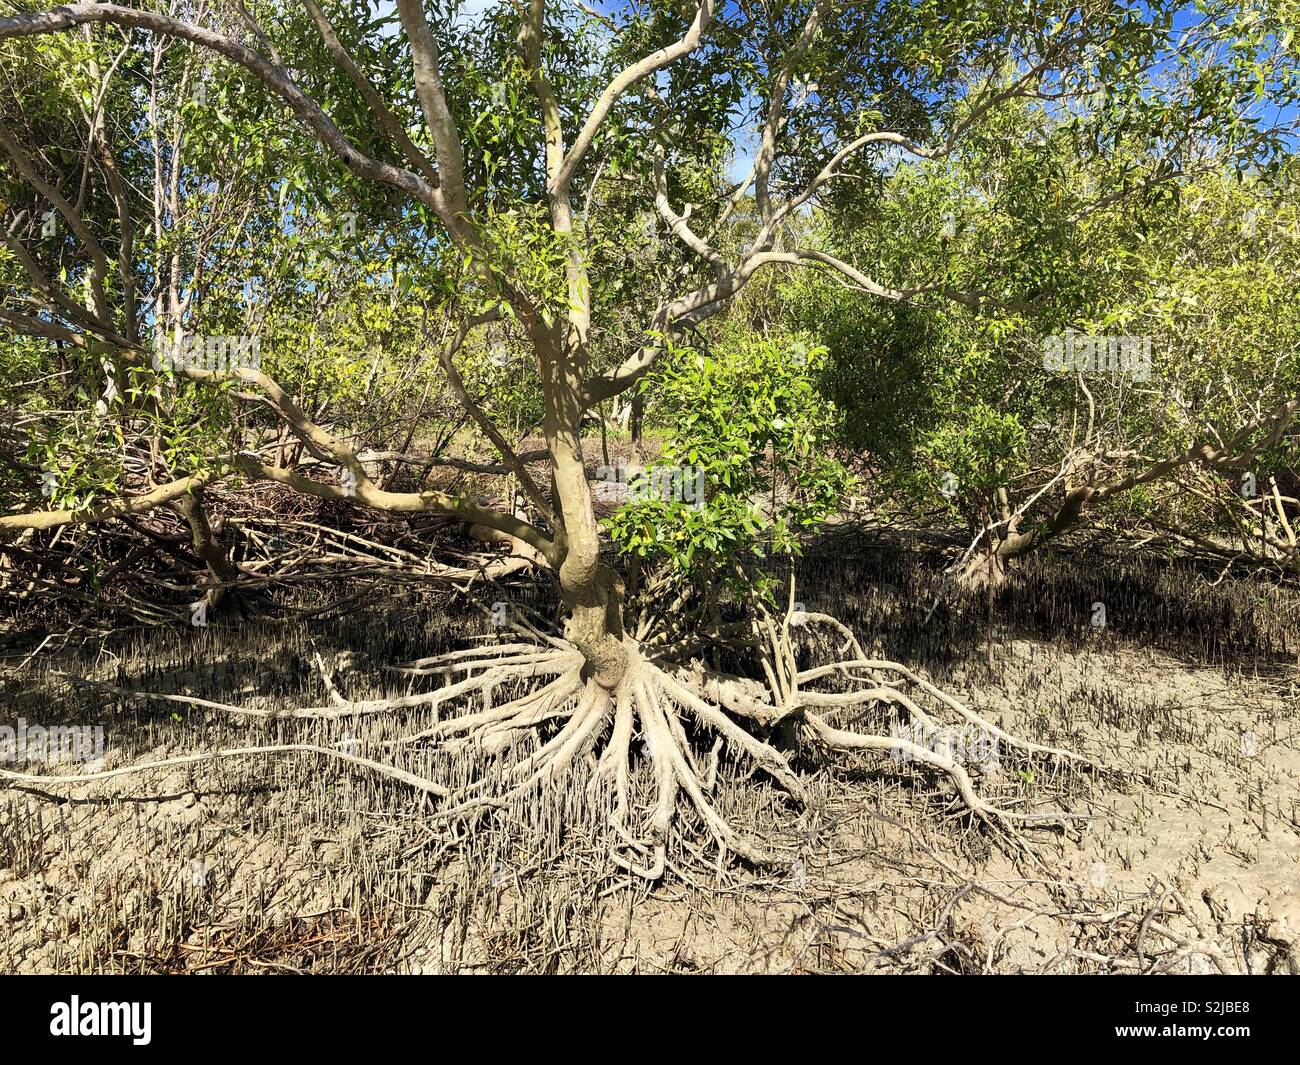 Mangrove tree and roots at low tide, in the Northern Territory of Australia. Stock Photo